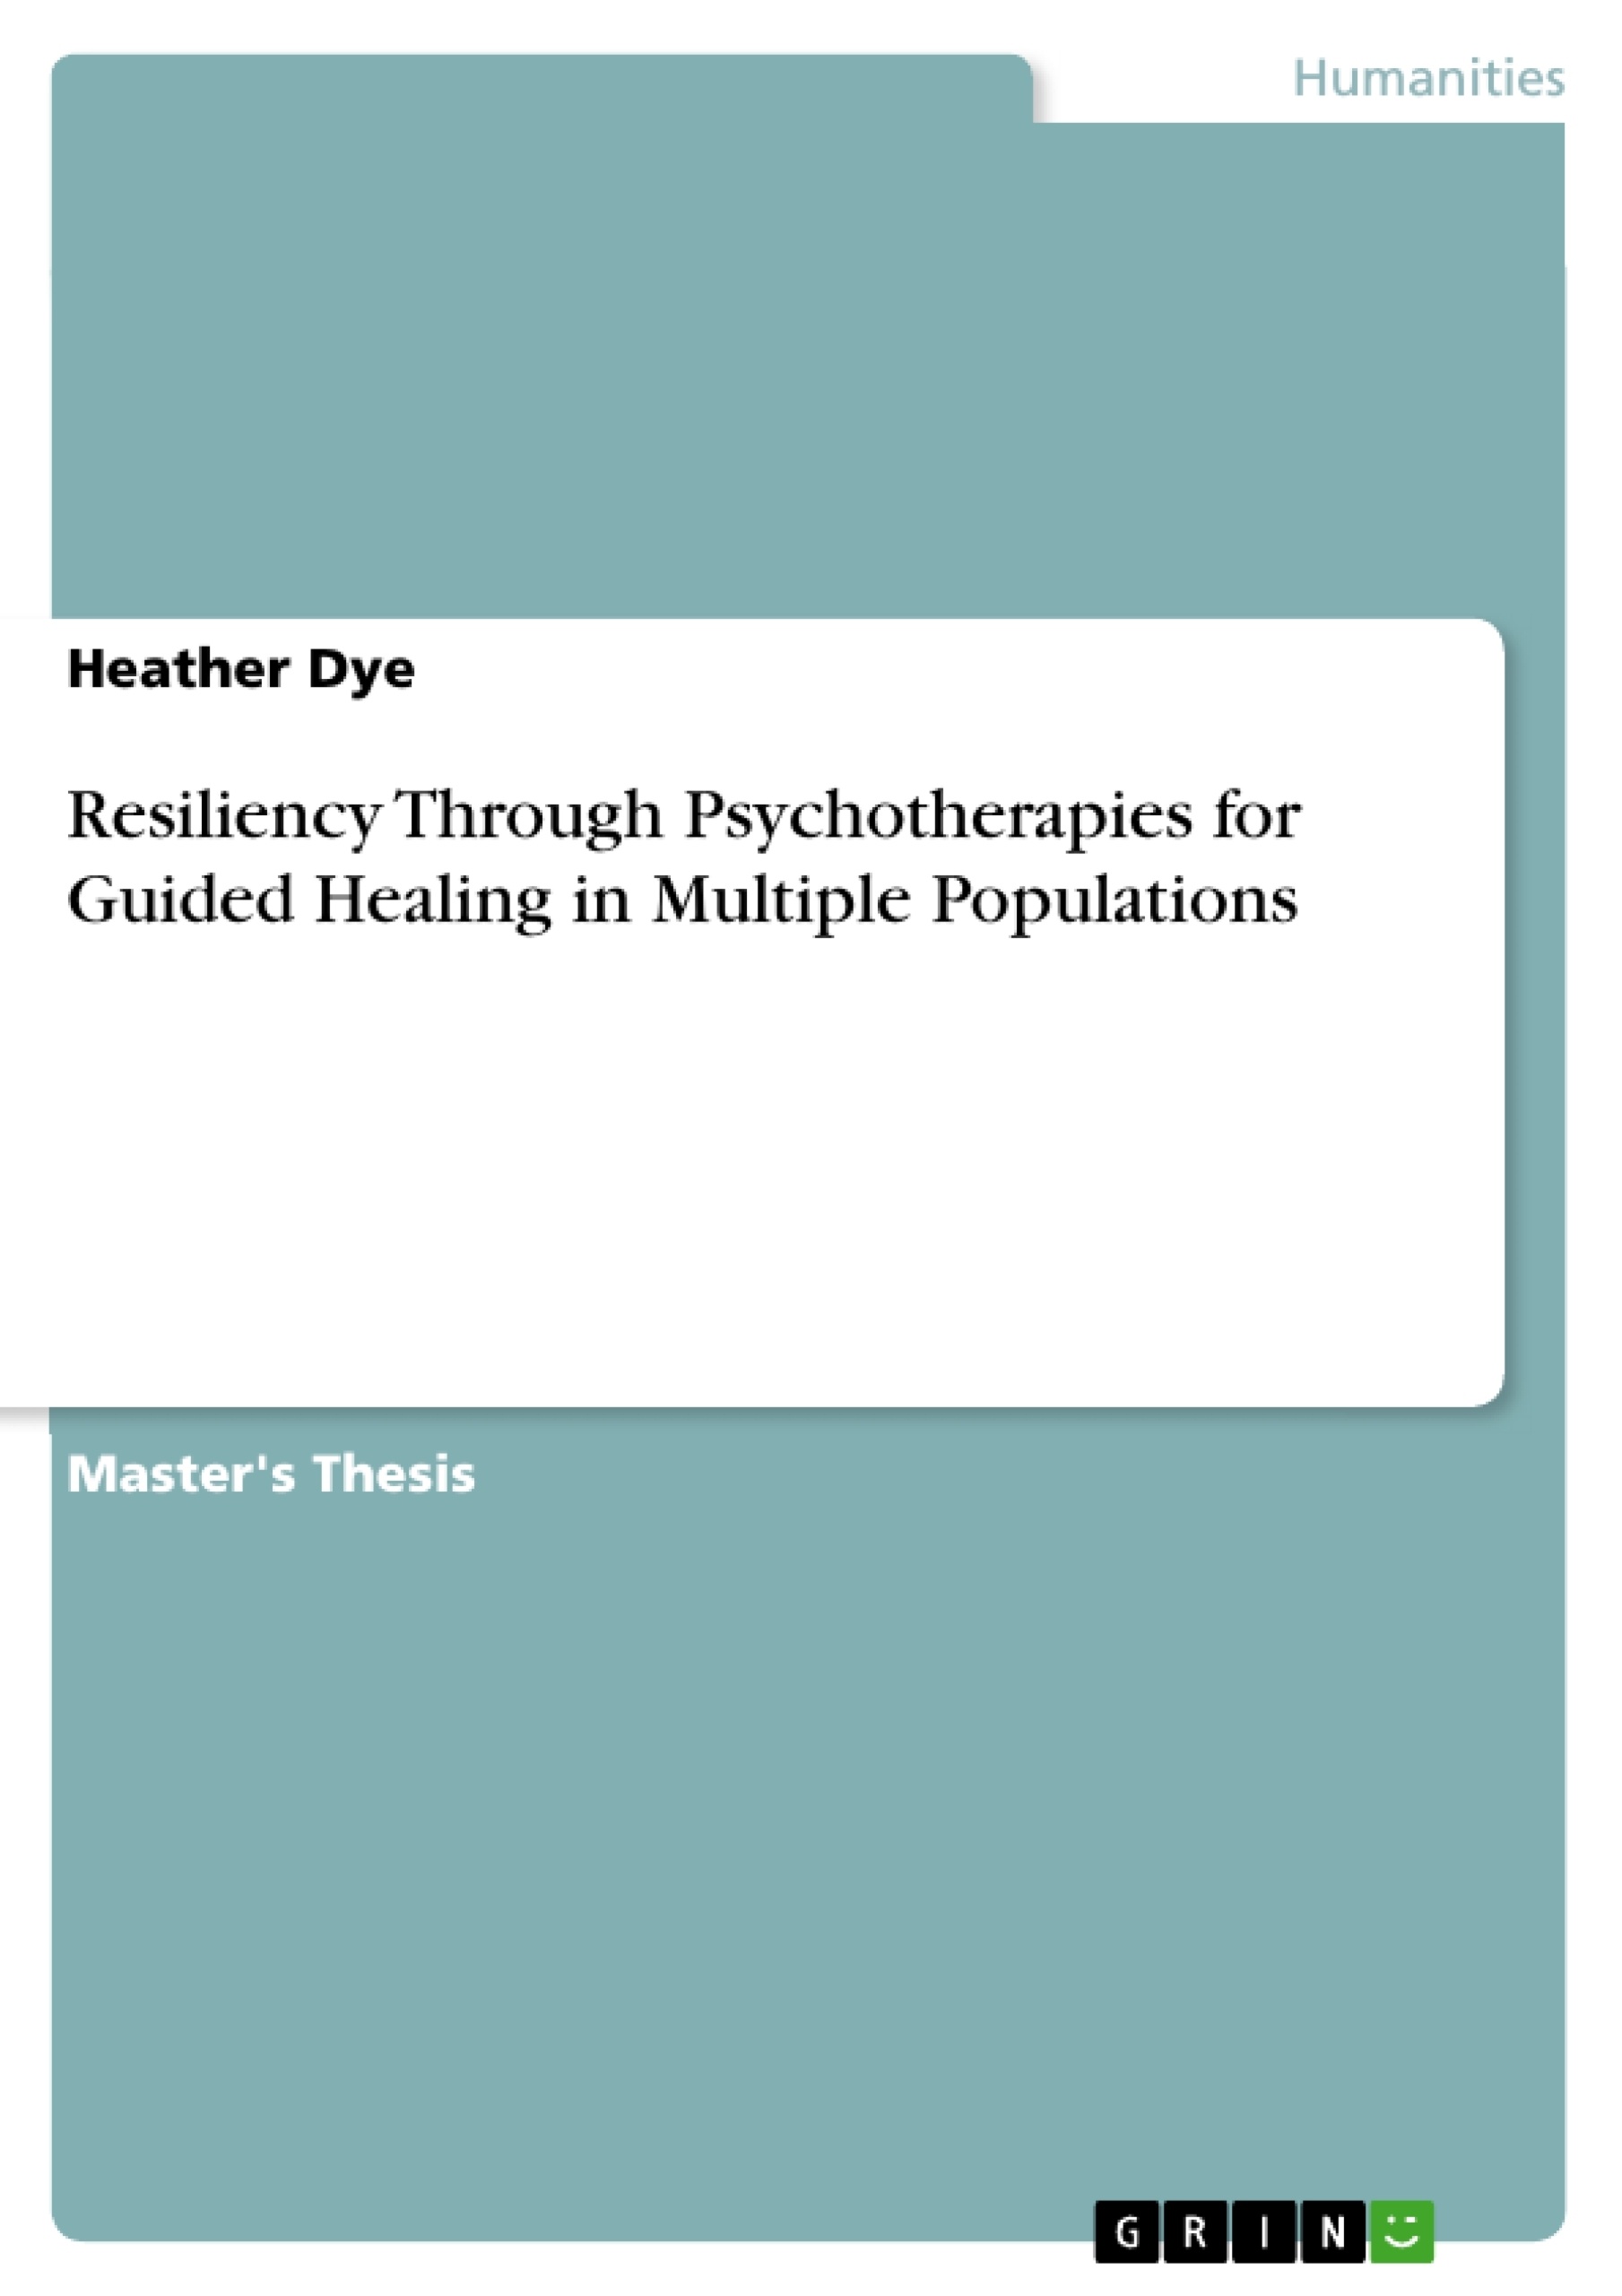 Title: Resiliency Through Psychotherapies for Guided Healing in Multiple Populations